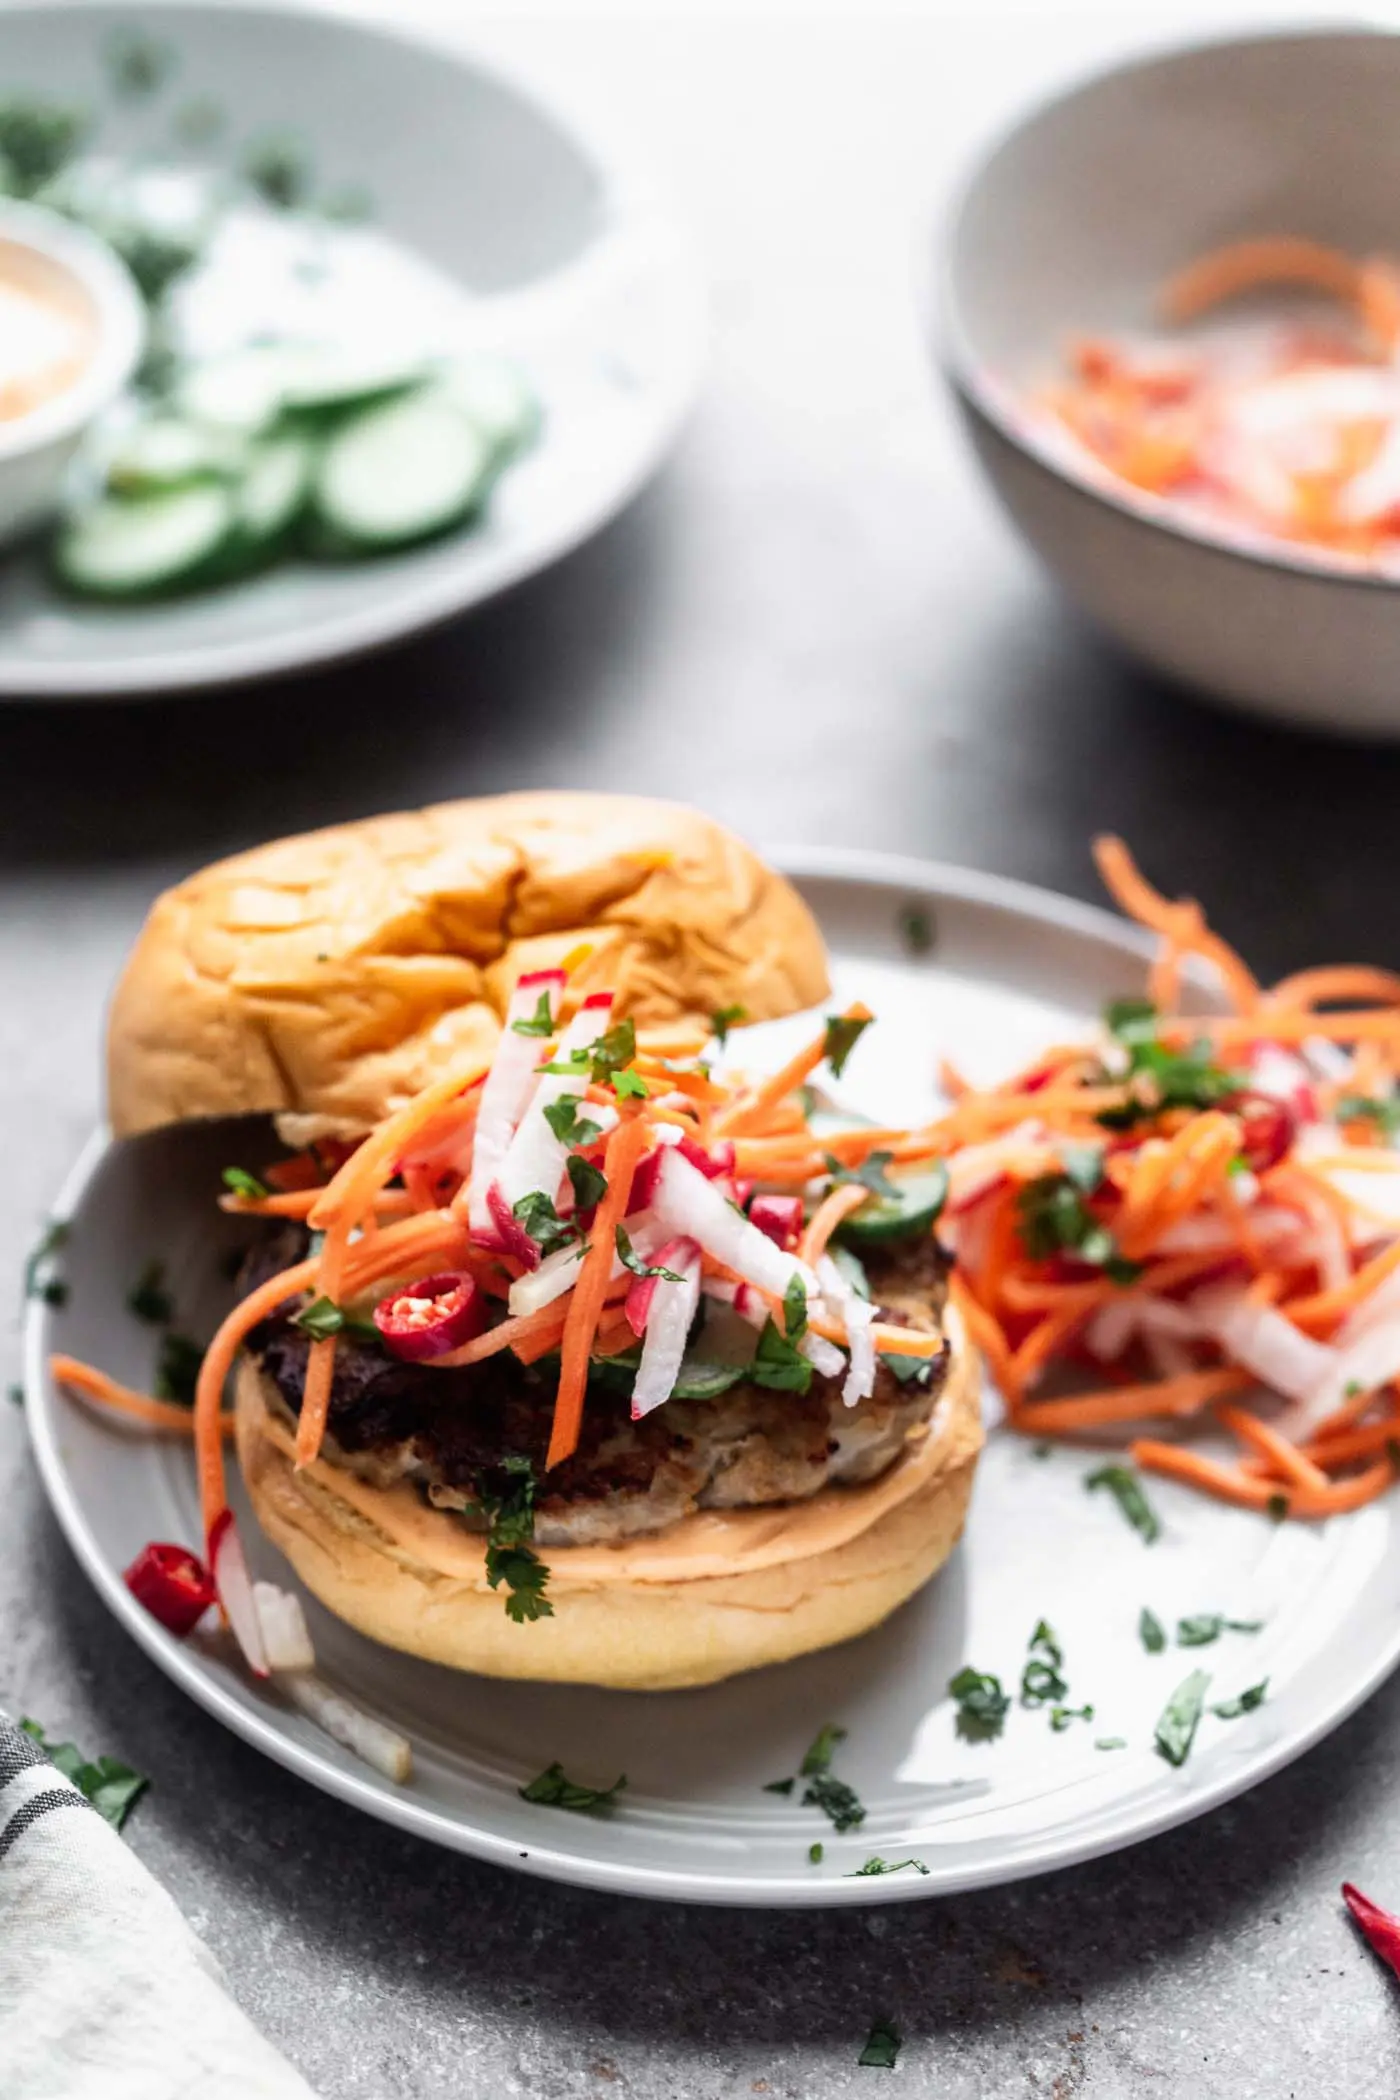 Bánh Mì Chicken Burgers are a burger take on a classic. A ground chicken patty is packed with all the flavors of a classic Bánh Mì sandwich, topped with sweet and spicy pickled veggies, a zippy sriracha mayo, and sandwiched between a toasted brioche bun. 